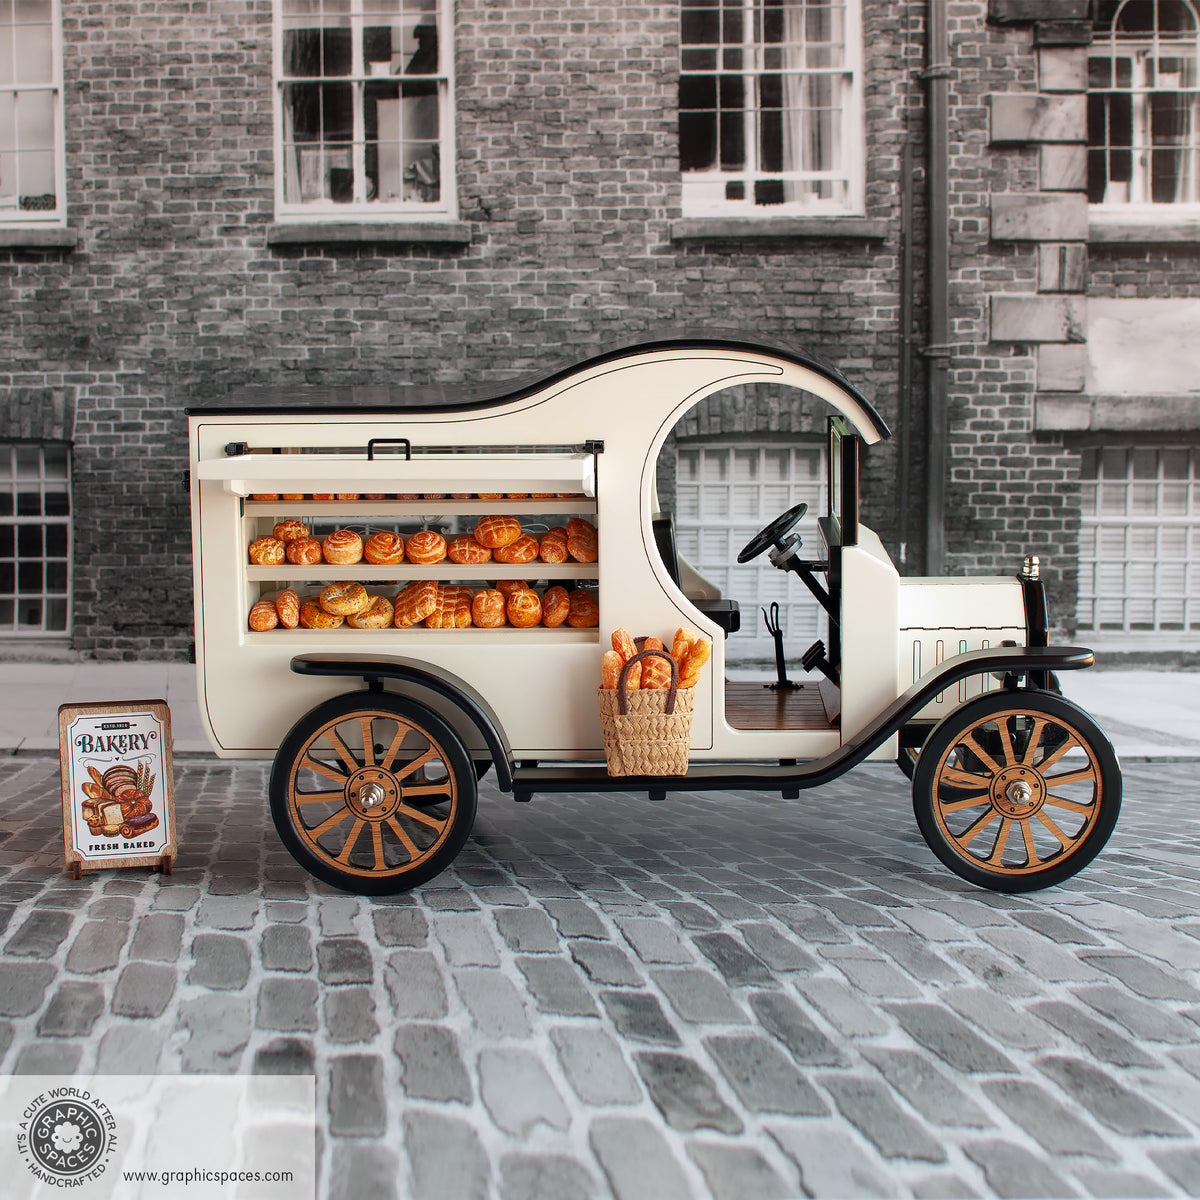 1:12 Scale Room Box White Bakery Shop Truck Model T C Cab. Passenger side view. Open window displaying  fresh baked breads.